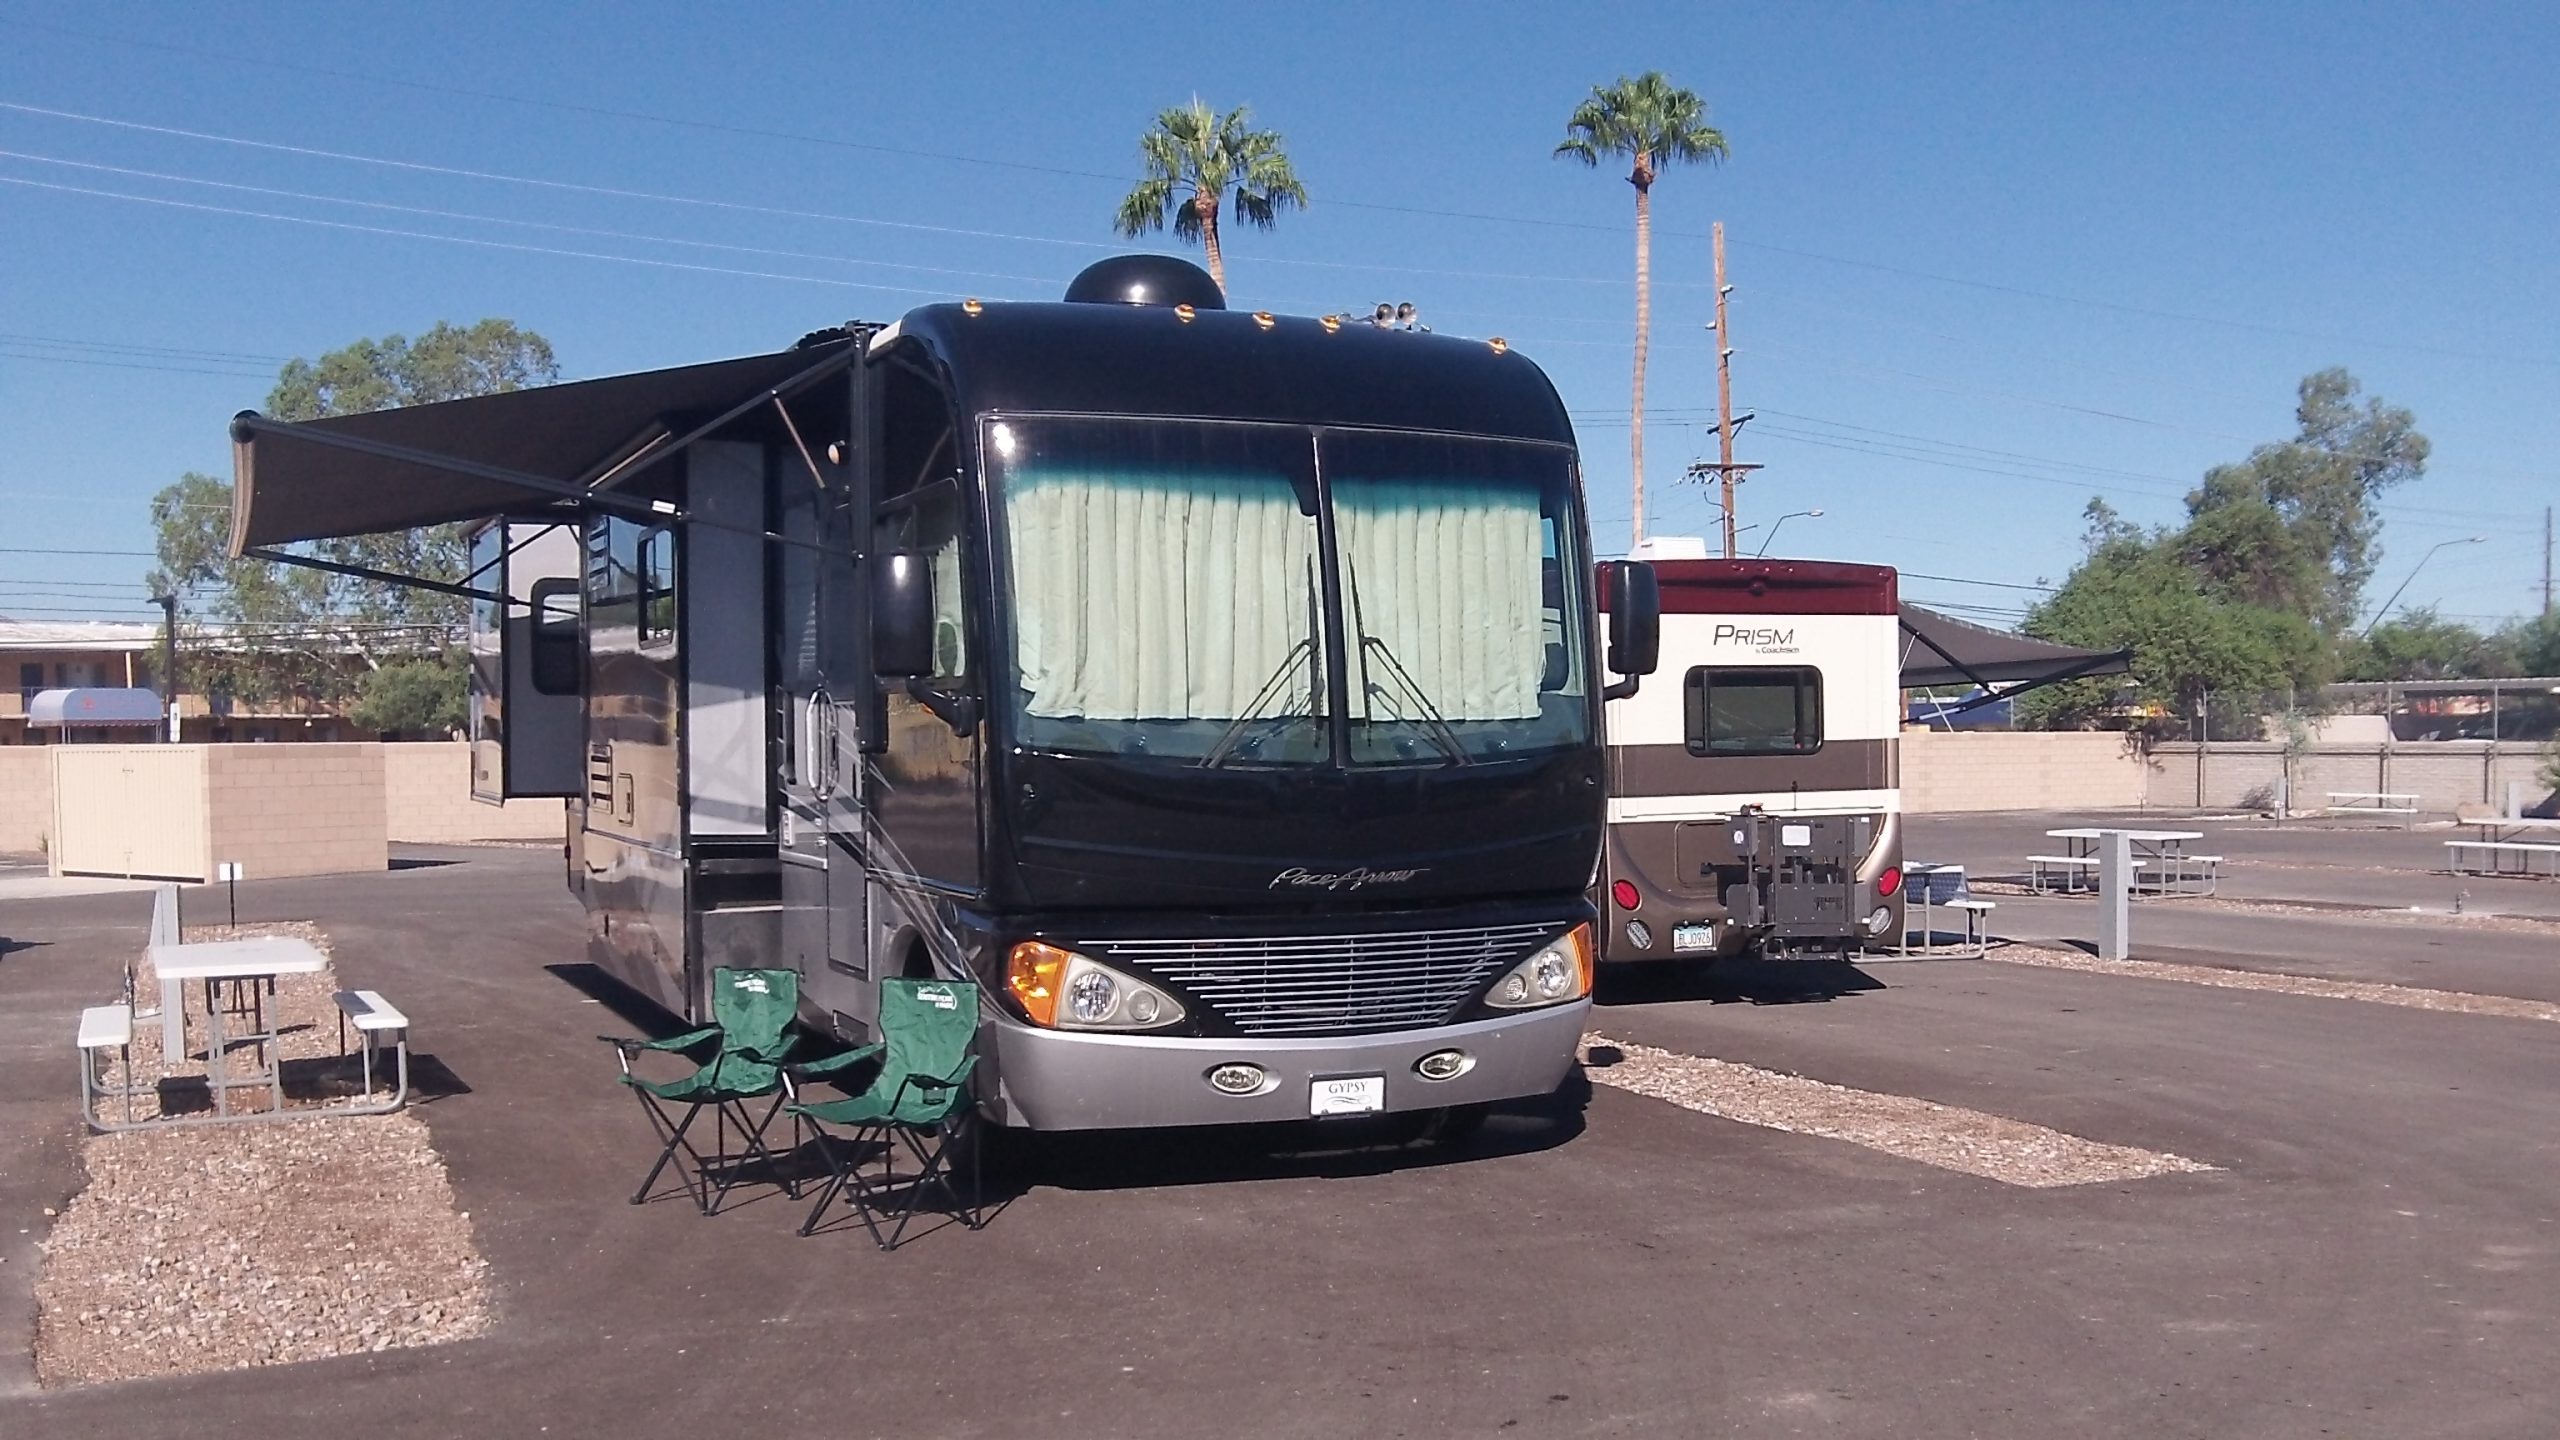 Tucson's only downtown RV Park